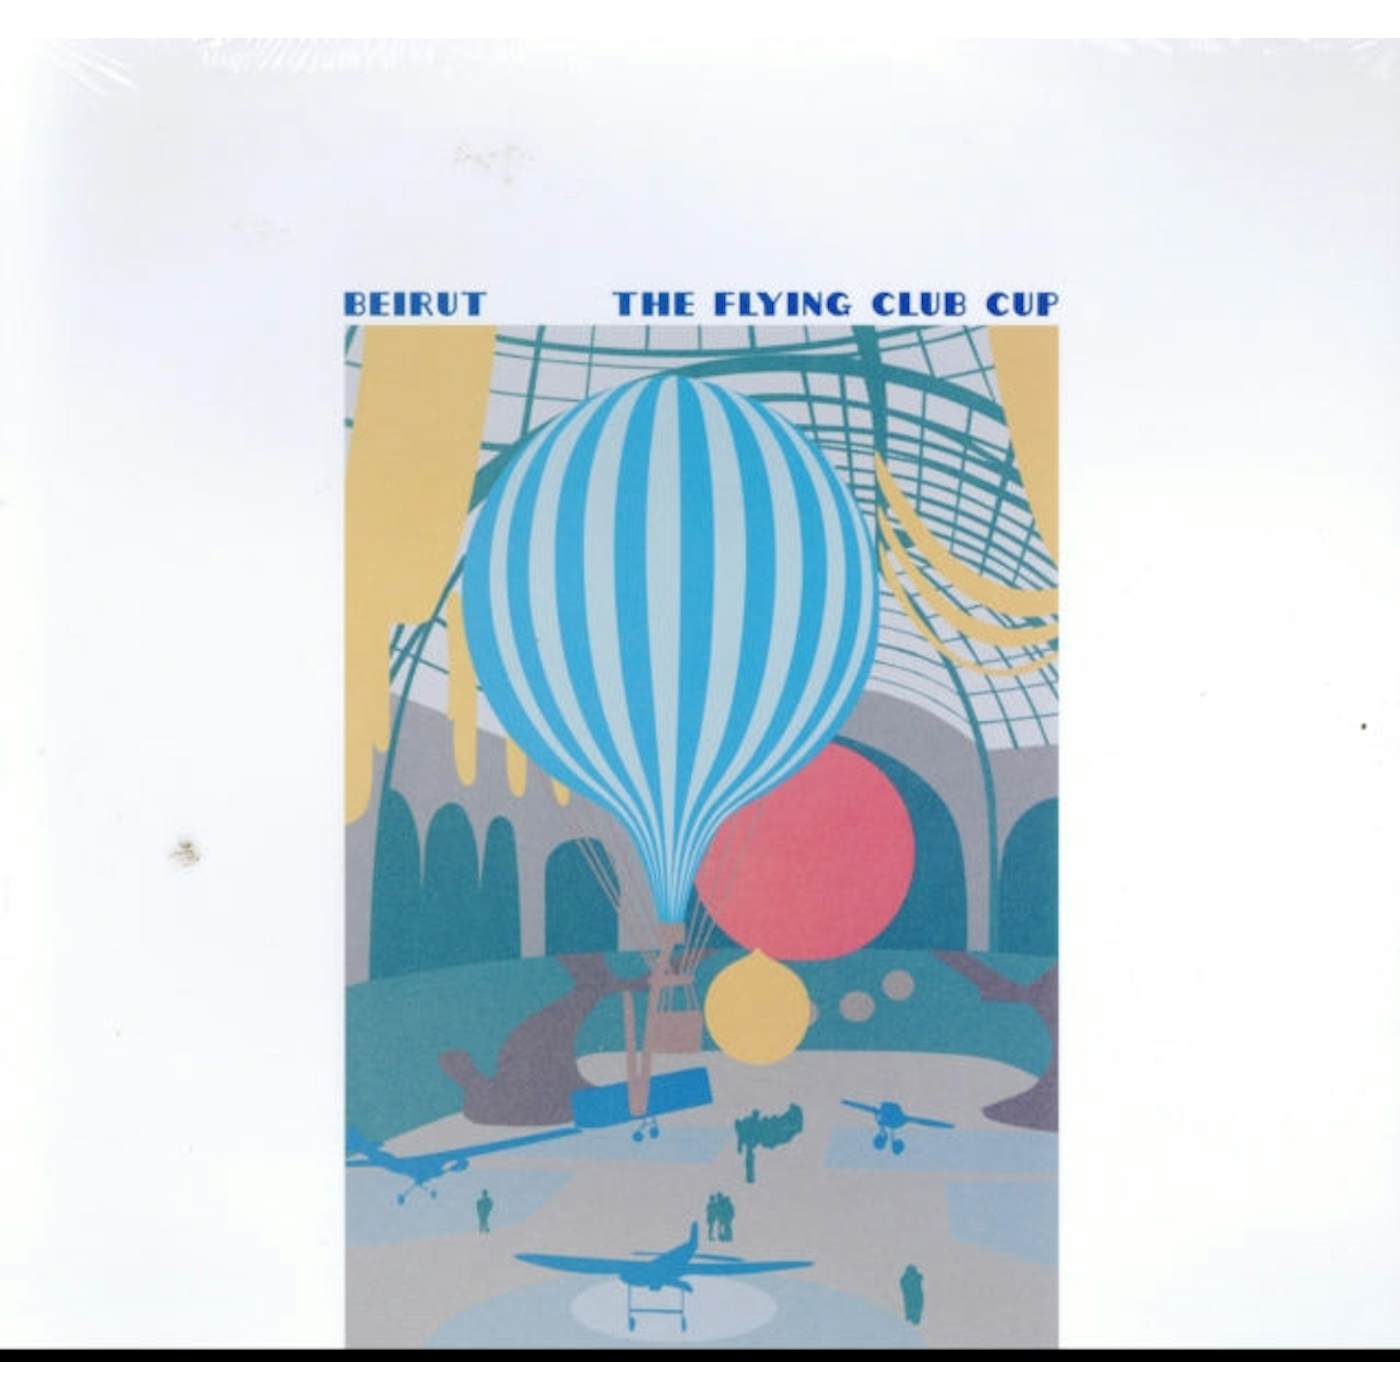 Beirut LP Vinyl Record  The Flying Club Cup